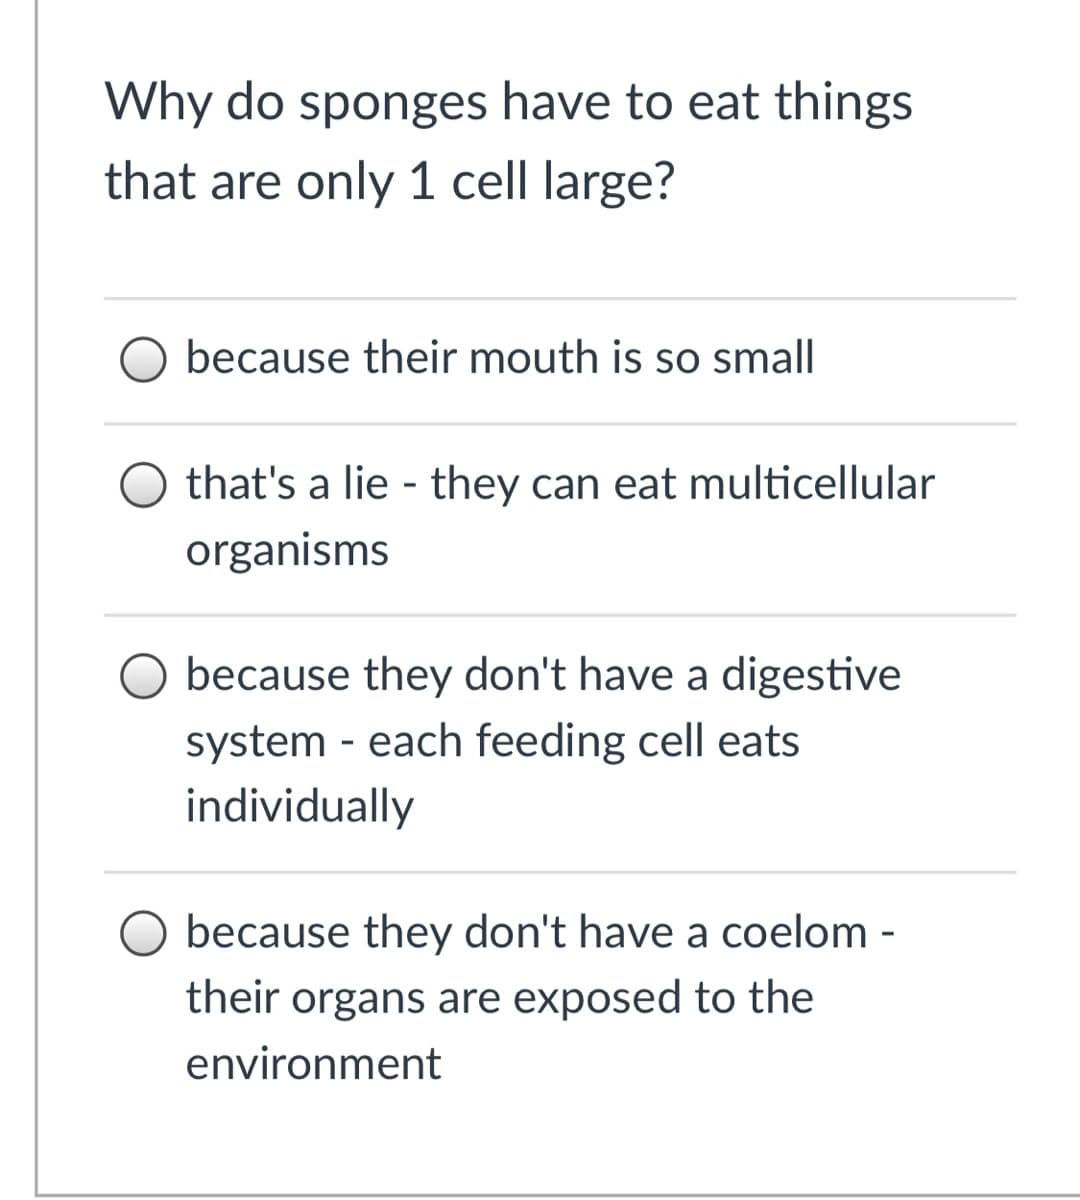 Why do sponges have to eat things
that are only 1 cell large?
O because their mouth is so small
that's a lie - they can eat multicellular
organisms
O because they don't have a digestive
system - each feeding cell eats
individually
because they don't have a coelom -
their organs are exposed to the
environment
